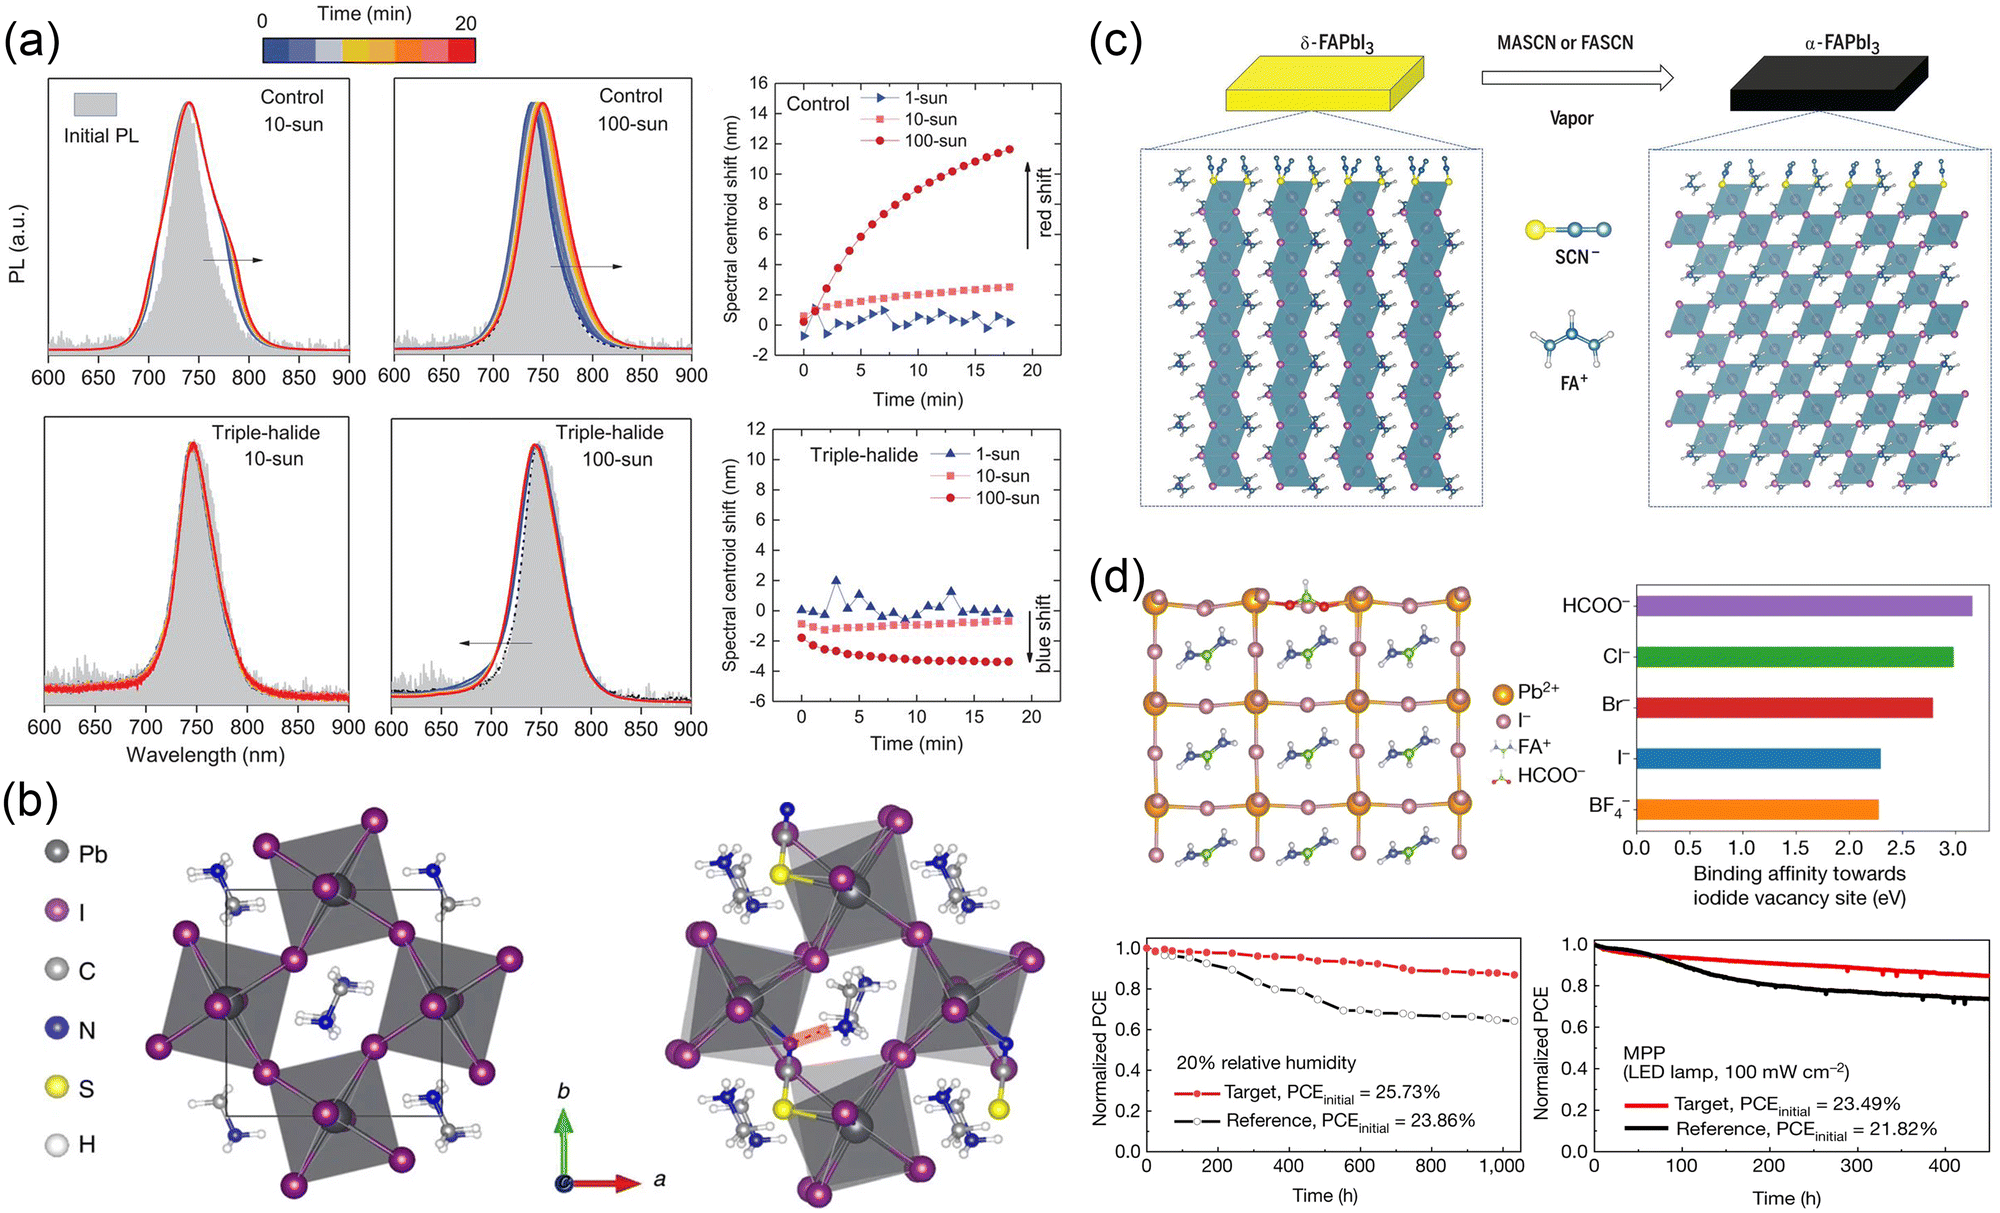 PbX 6 ] 4− modulation and organic spacer construction for stable 